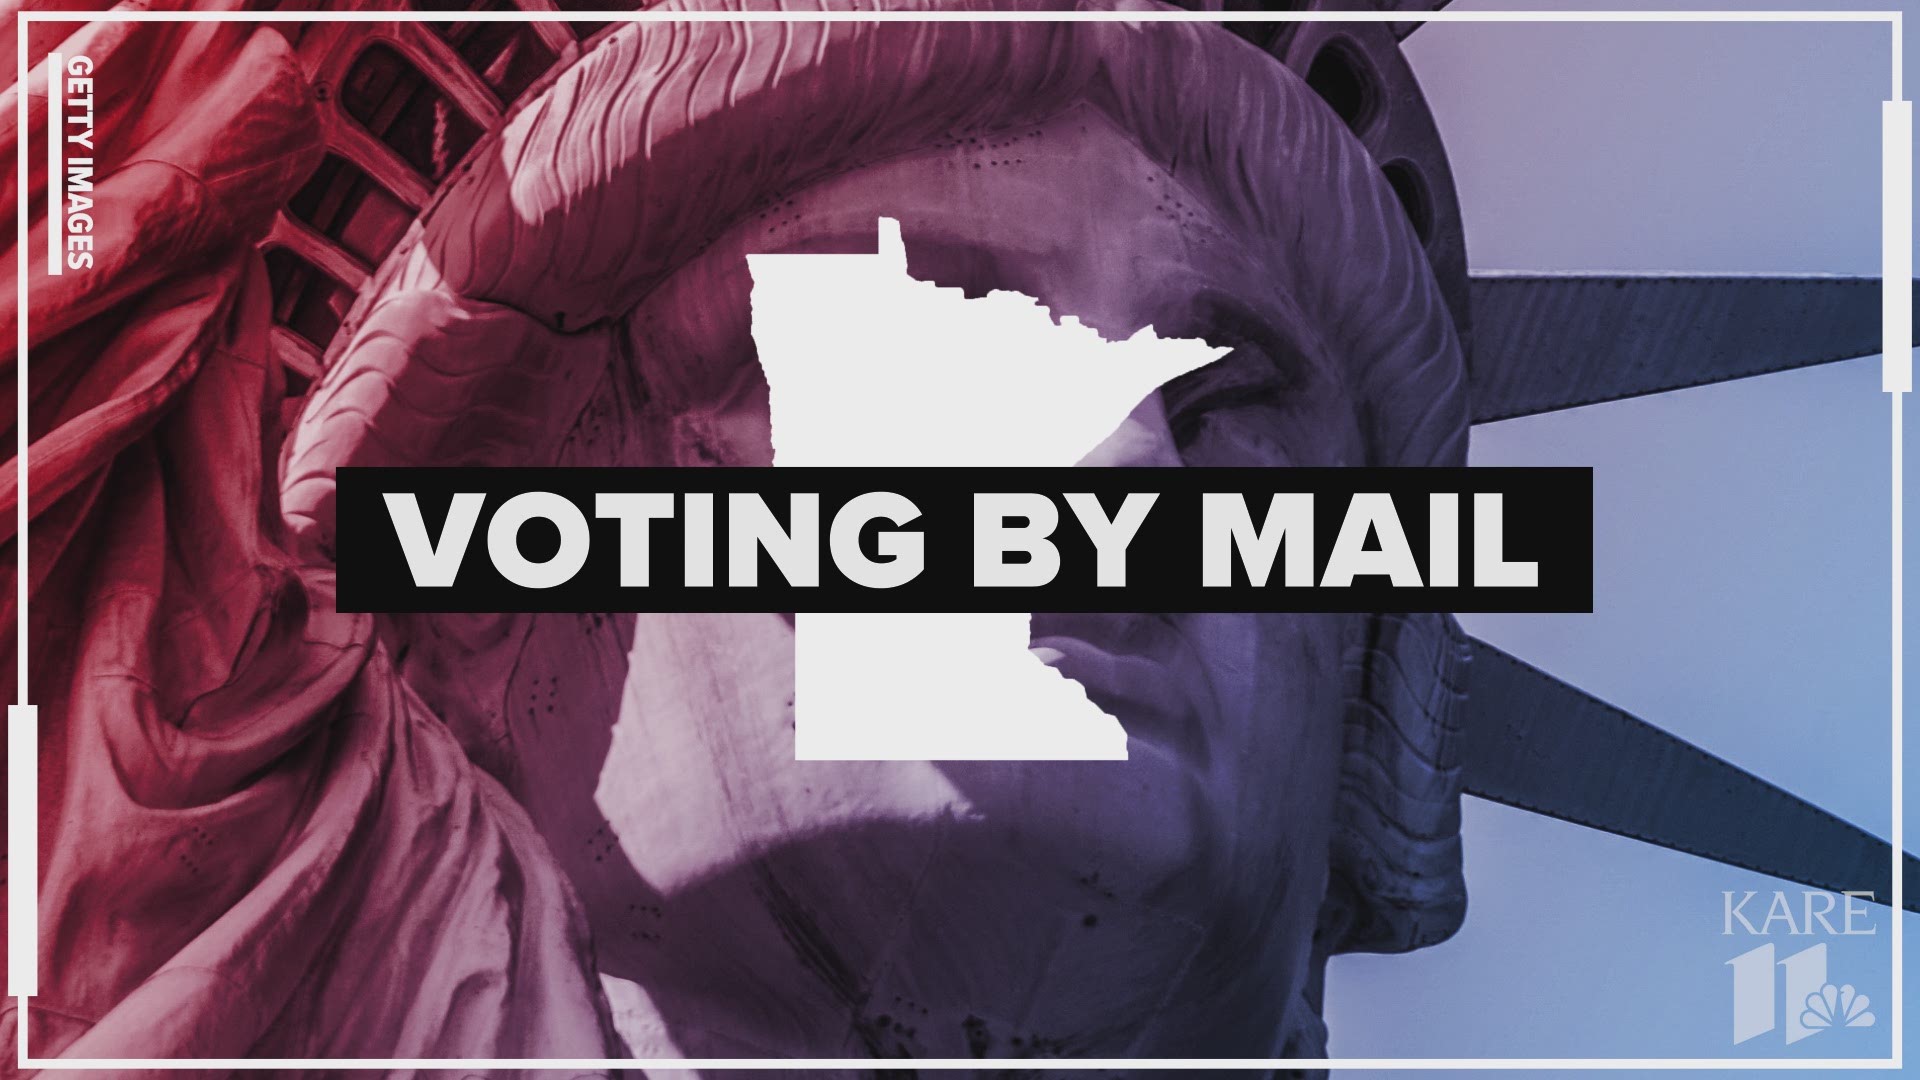 With a pandemic and election year in full swing, here's how to vote by mail in Minnesota.